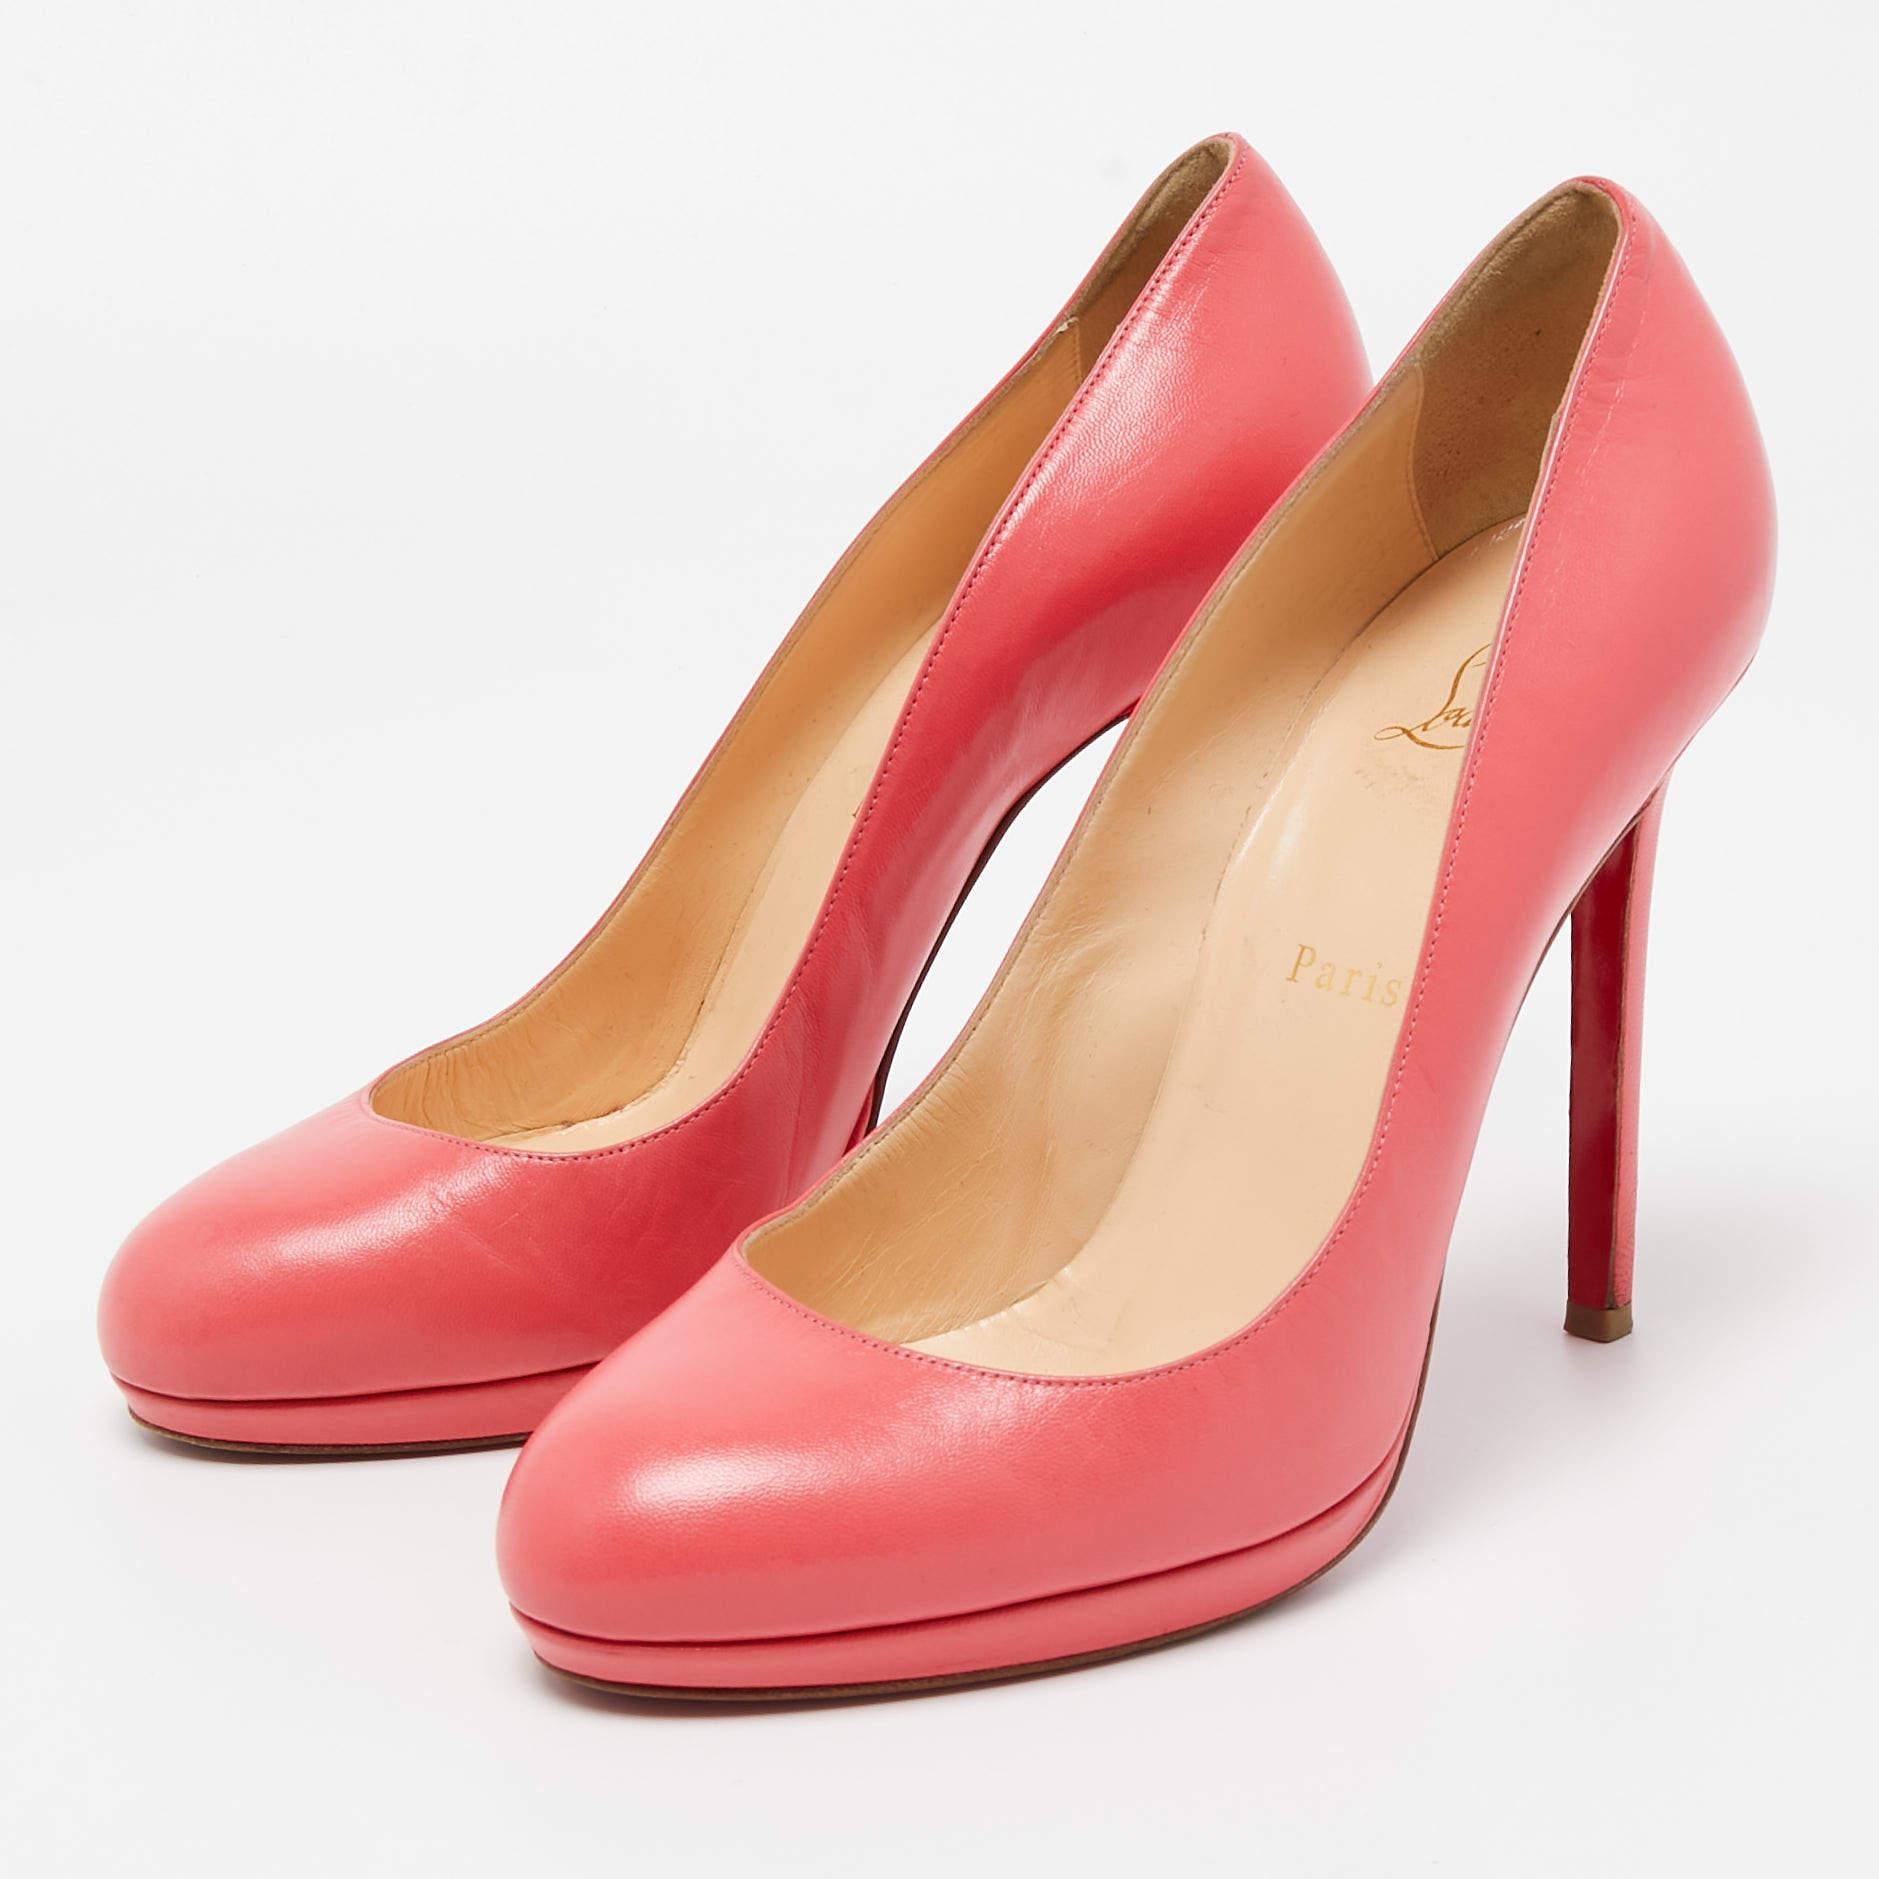 Christian Louboutin Pink Leather Simple Round Toe Pumps Size 40 In Good Condition For Sale In Dubai, Al Qouz 2